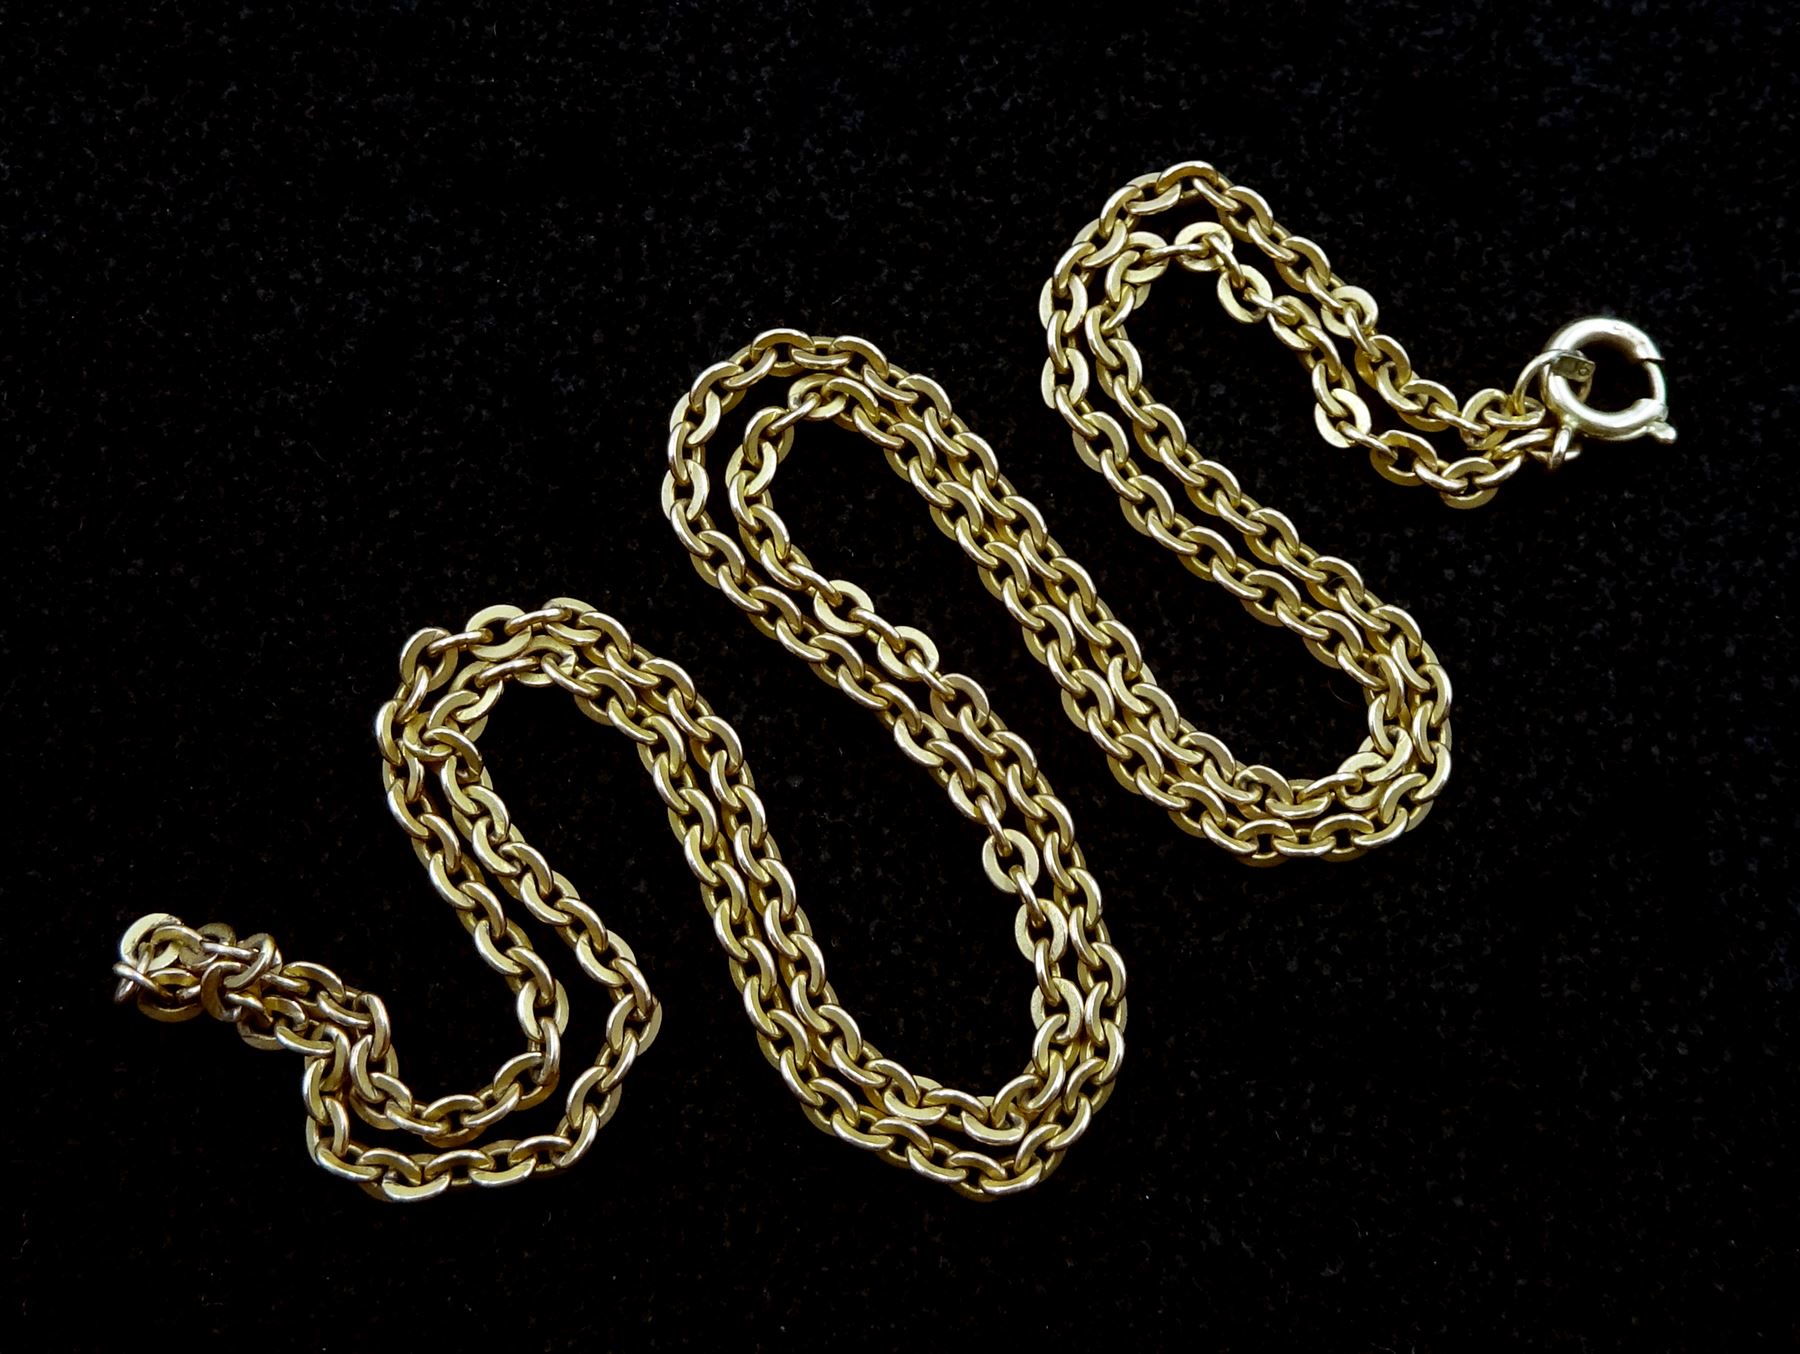 Gold link chain necklace stamped 9ct - Image 3 of 3